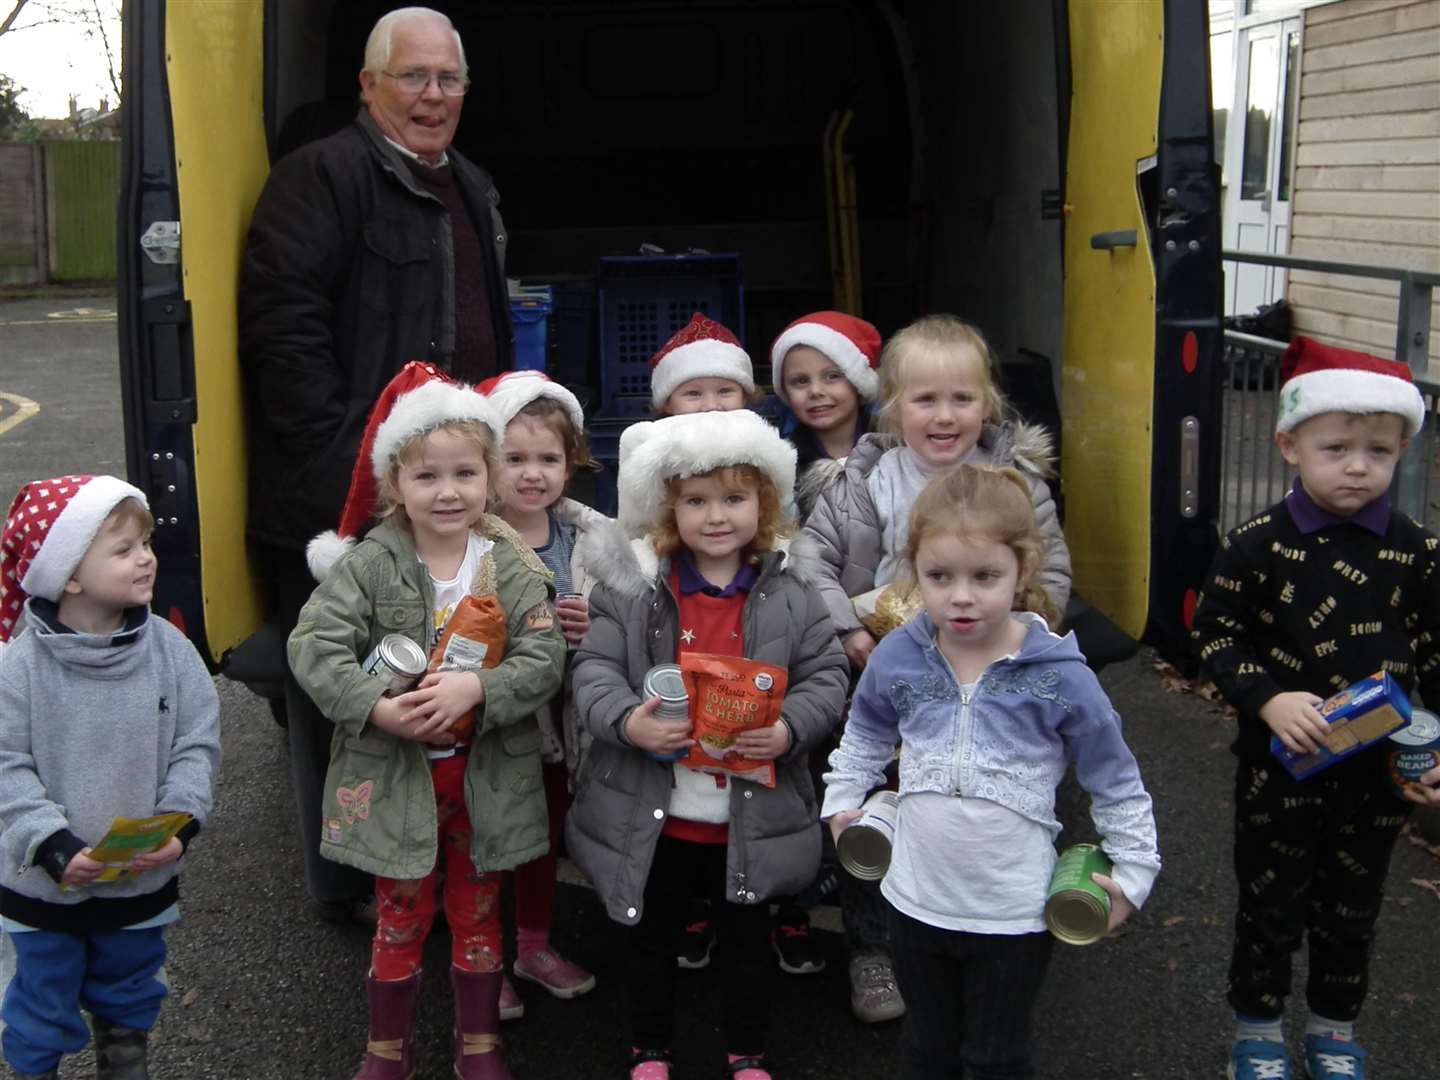 Children from the Bright Sparks Nursery with their donations. Pictur: Picture: Deal Food Bank